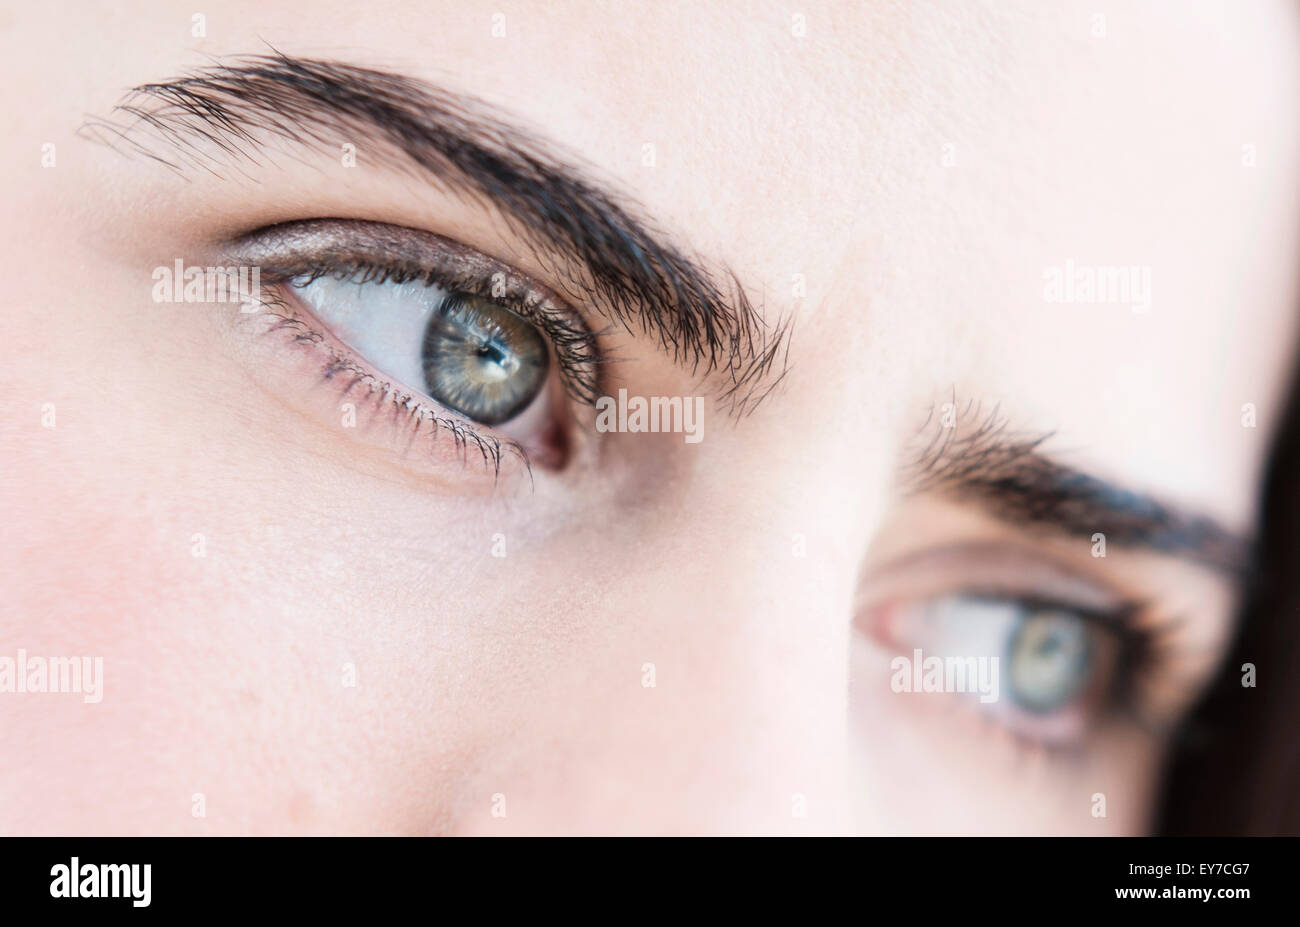 Portrait of young woman with blue eyes Stock Photo